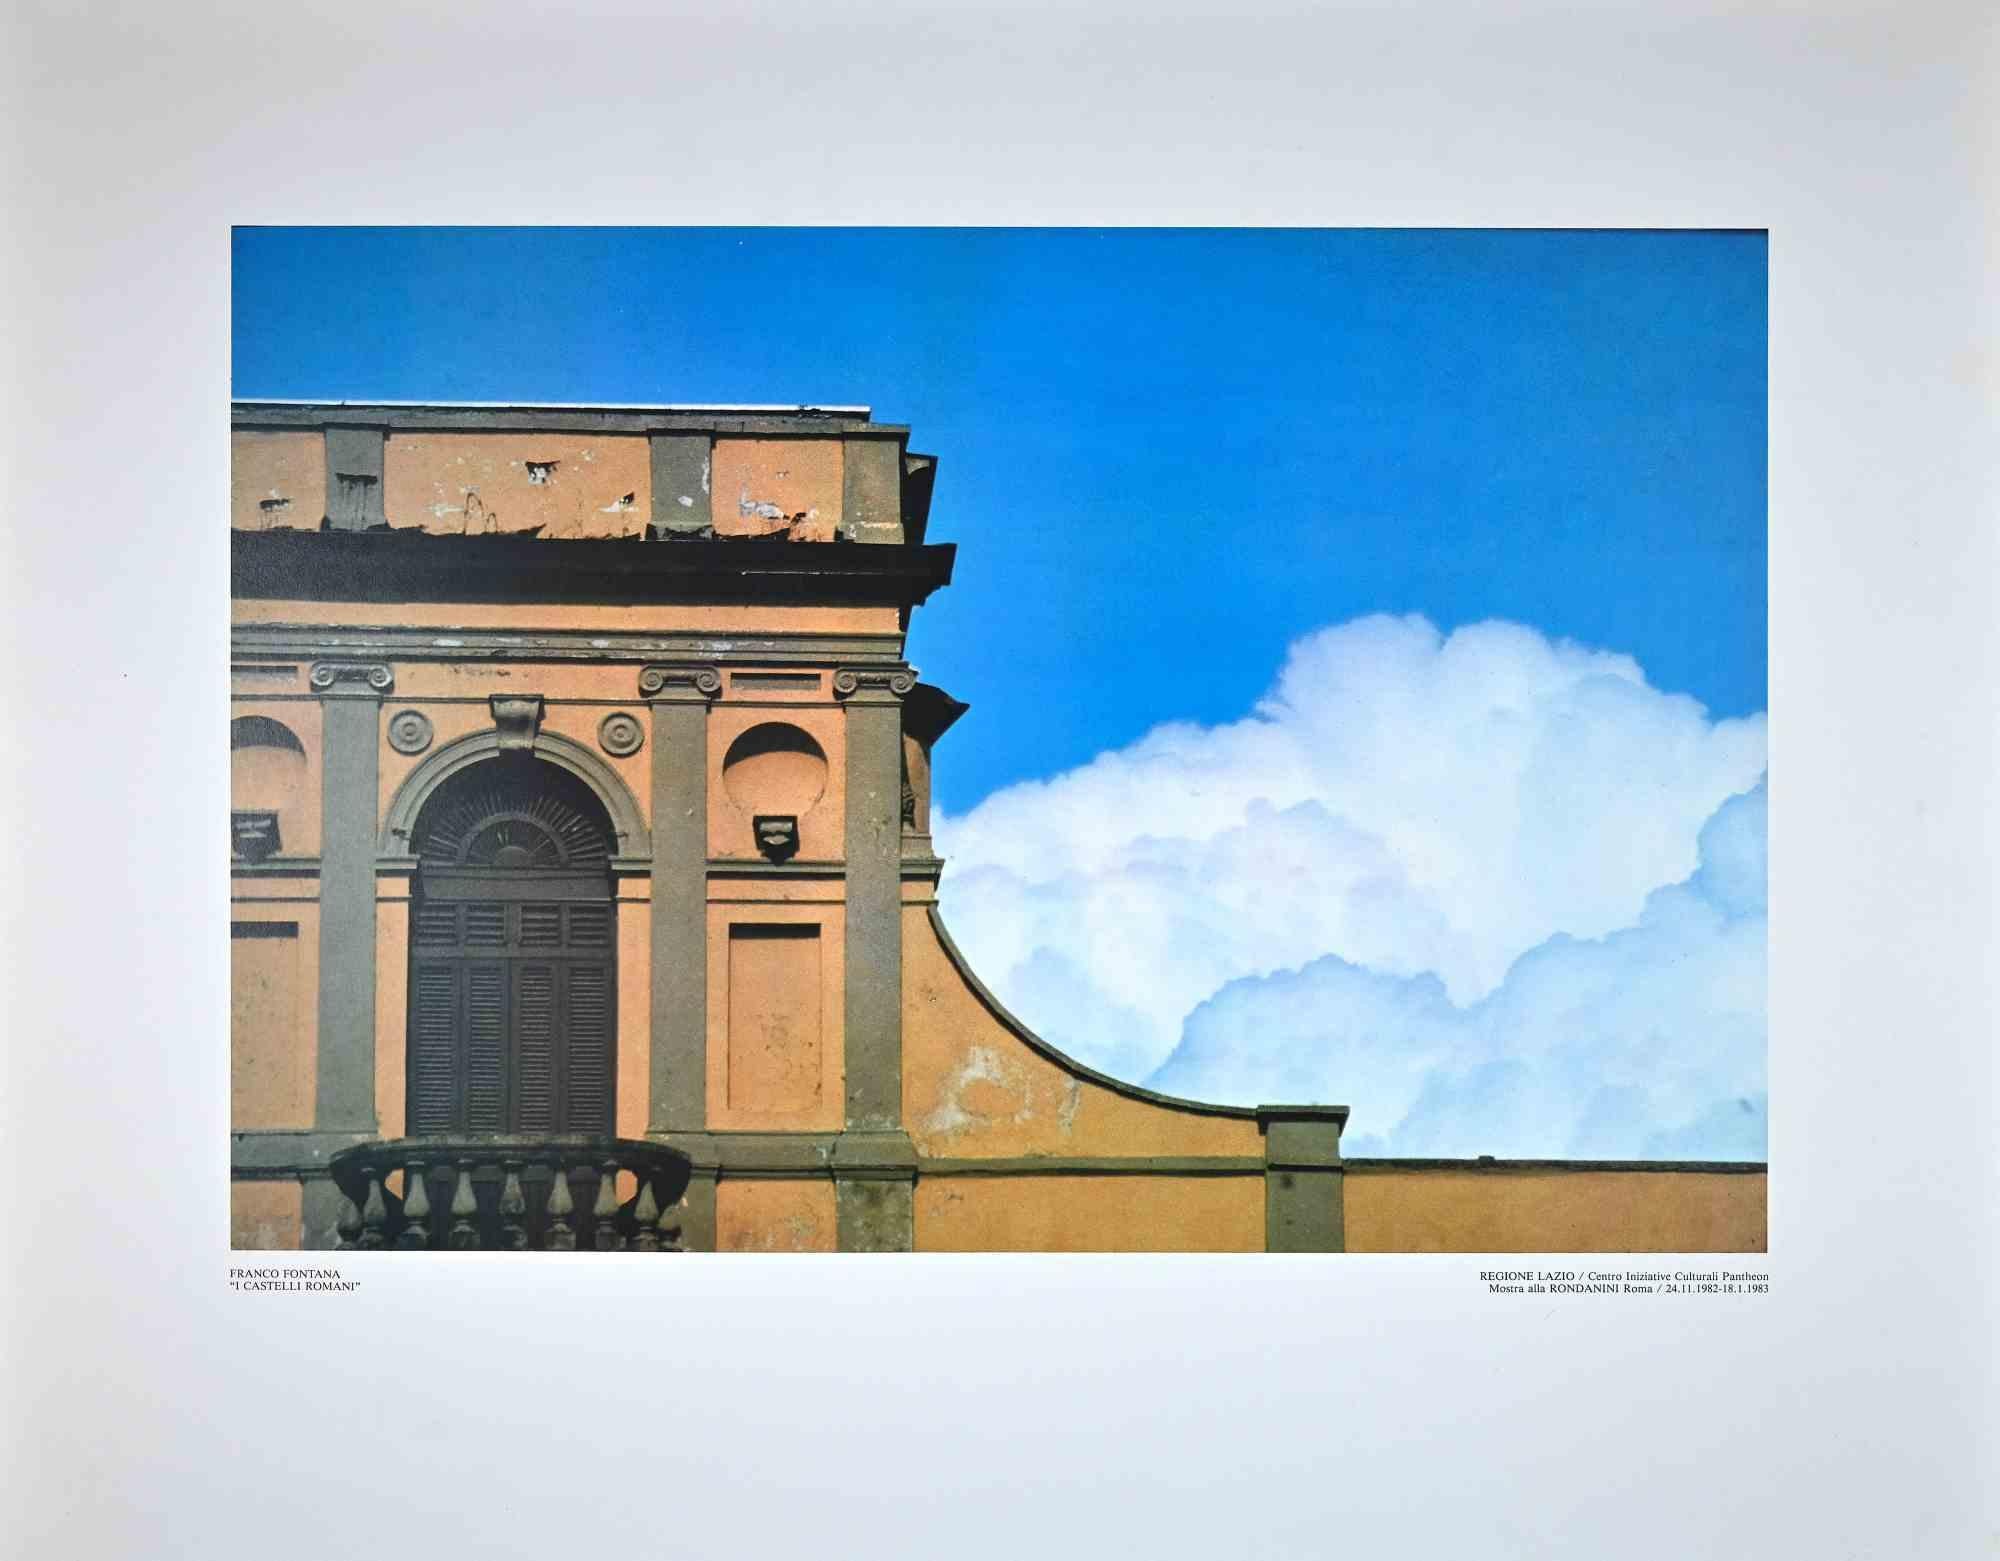 Roman Castels  is a beautiful offset realized by  Franco Fontana.

Good conditions.

Colored poster from a photograph by Franco Fontana (Modena, 1933), one of the Italian most famous contemporary photographers. Titled at the bottom. Very good